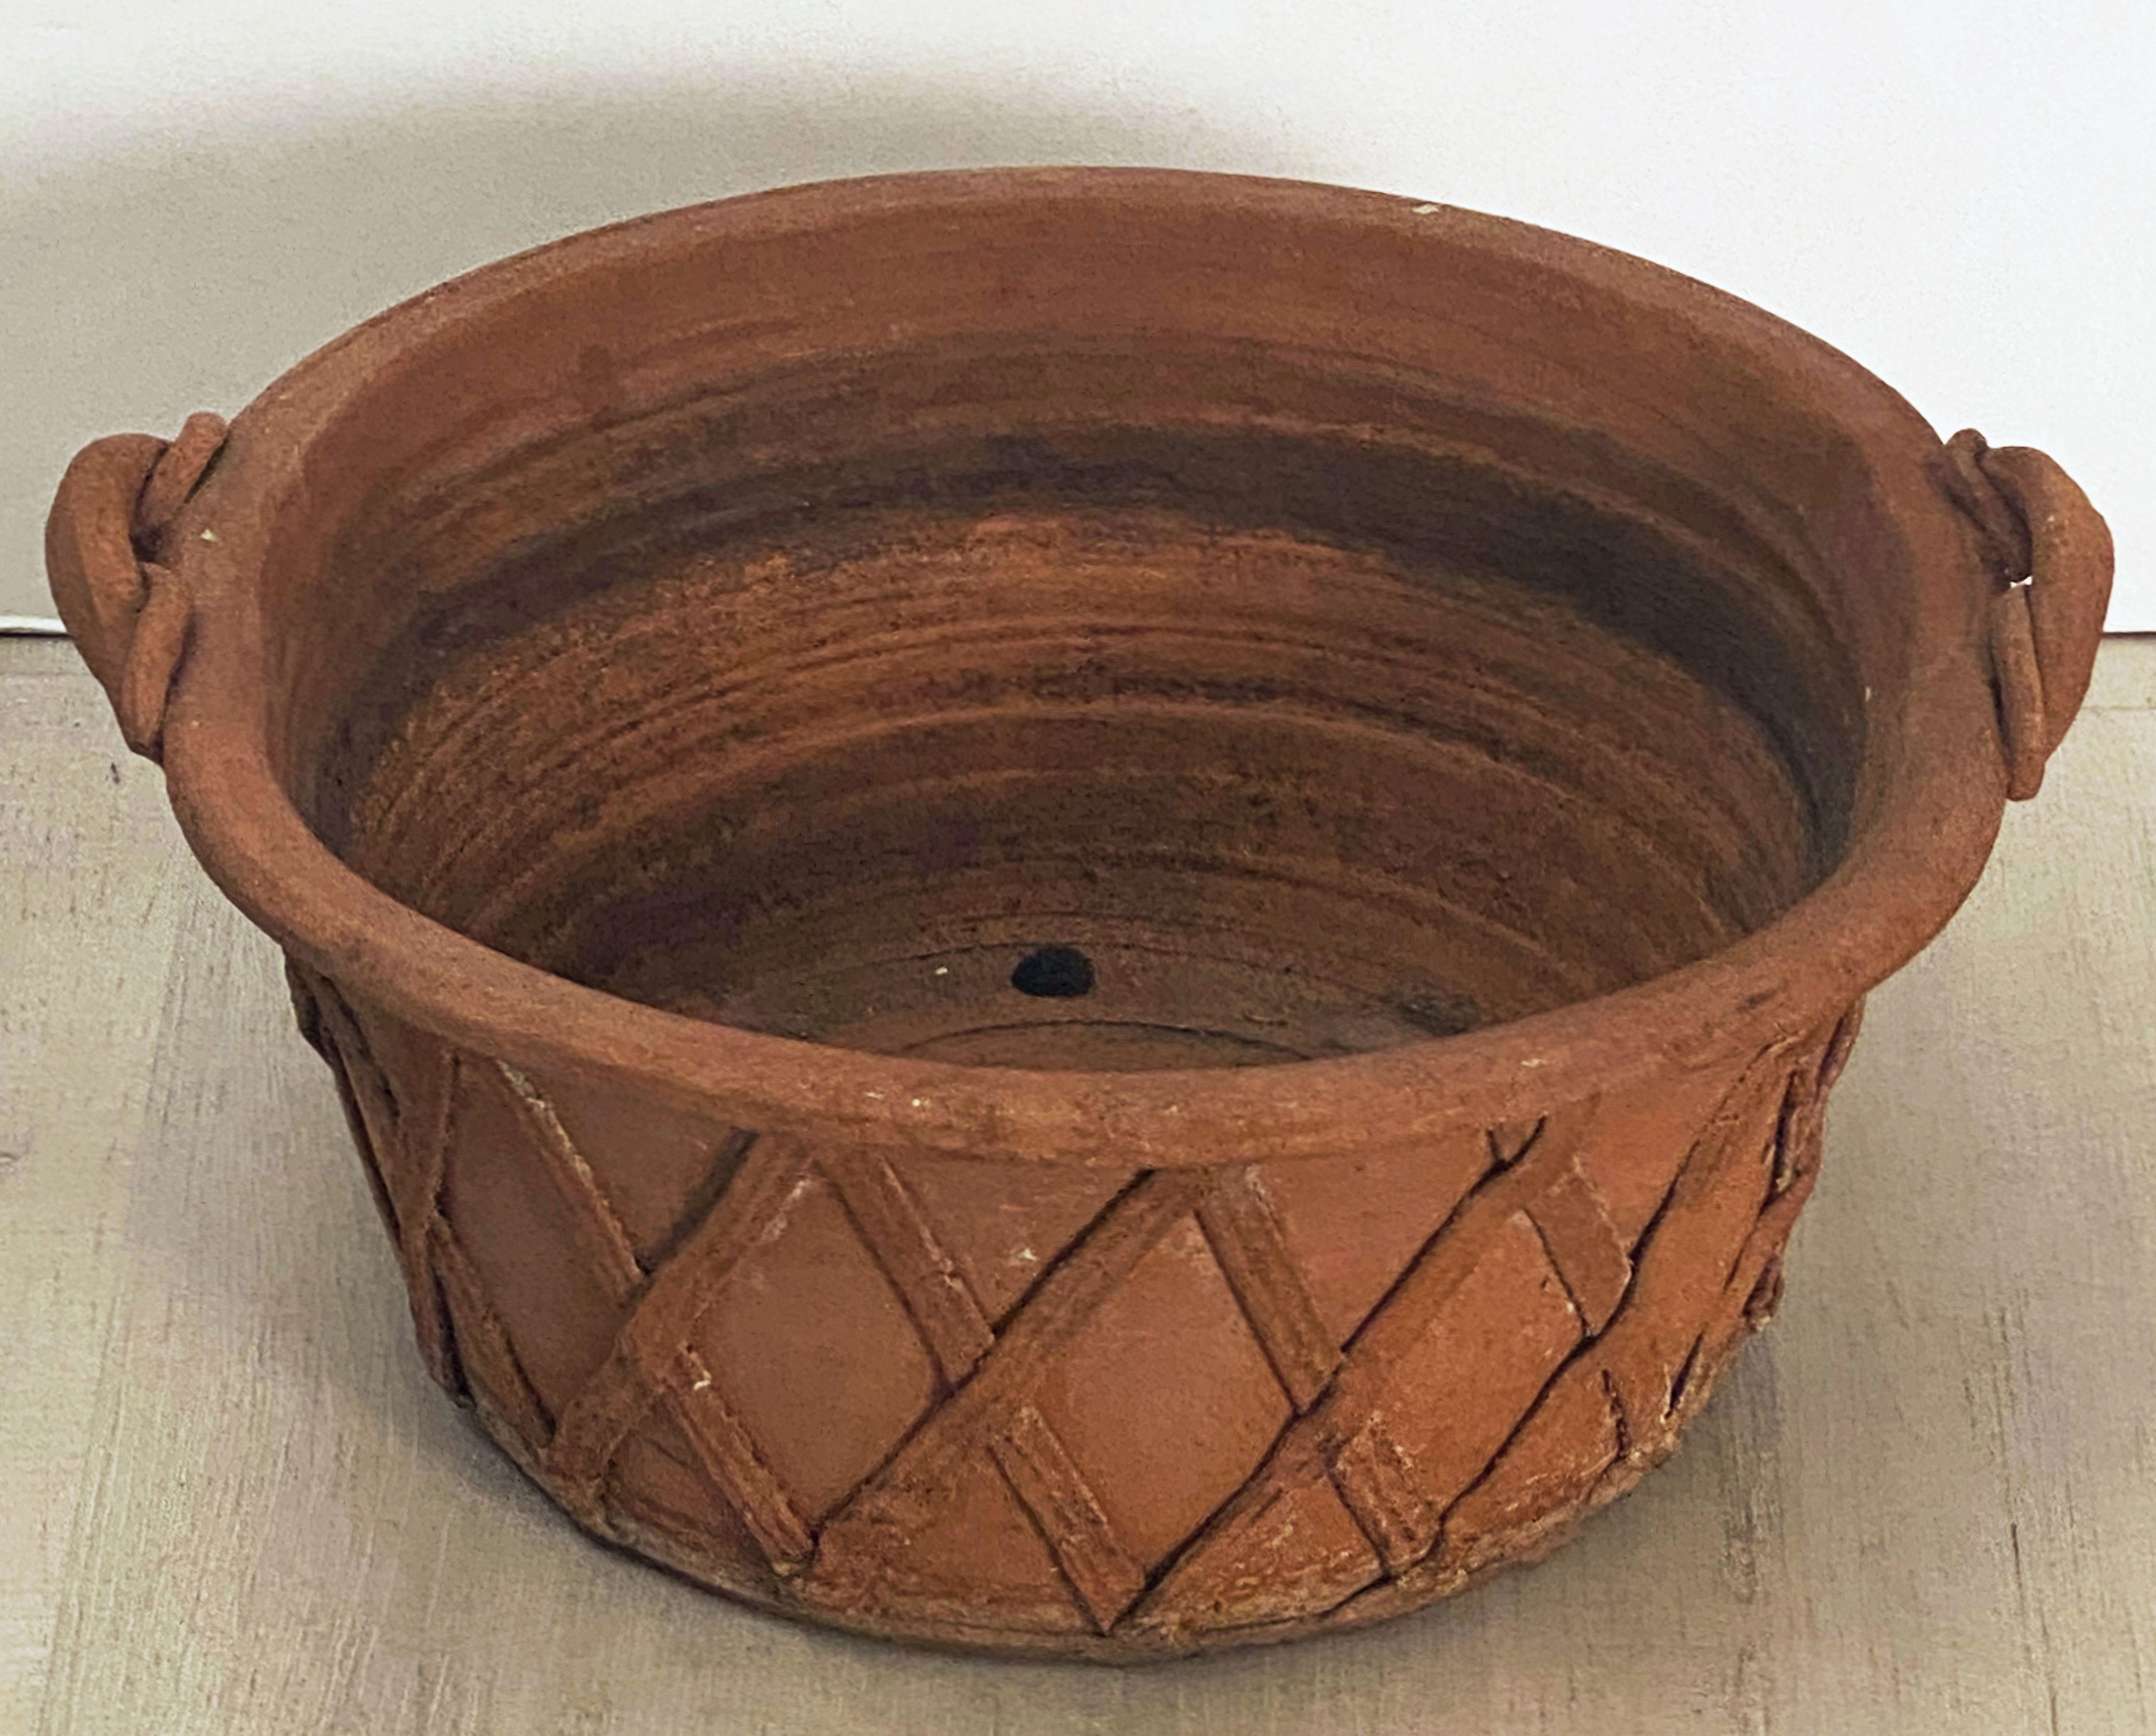 English Lattice Pattern Garden Planter Pot or Bowl of Terracotta In Good Condition For Sale In Austin, TX